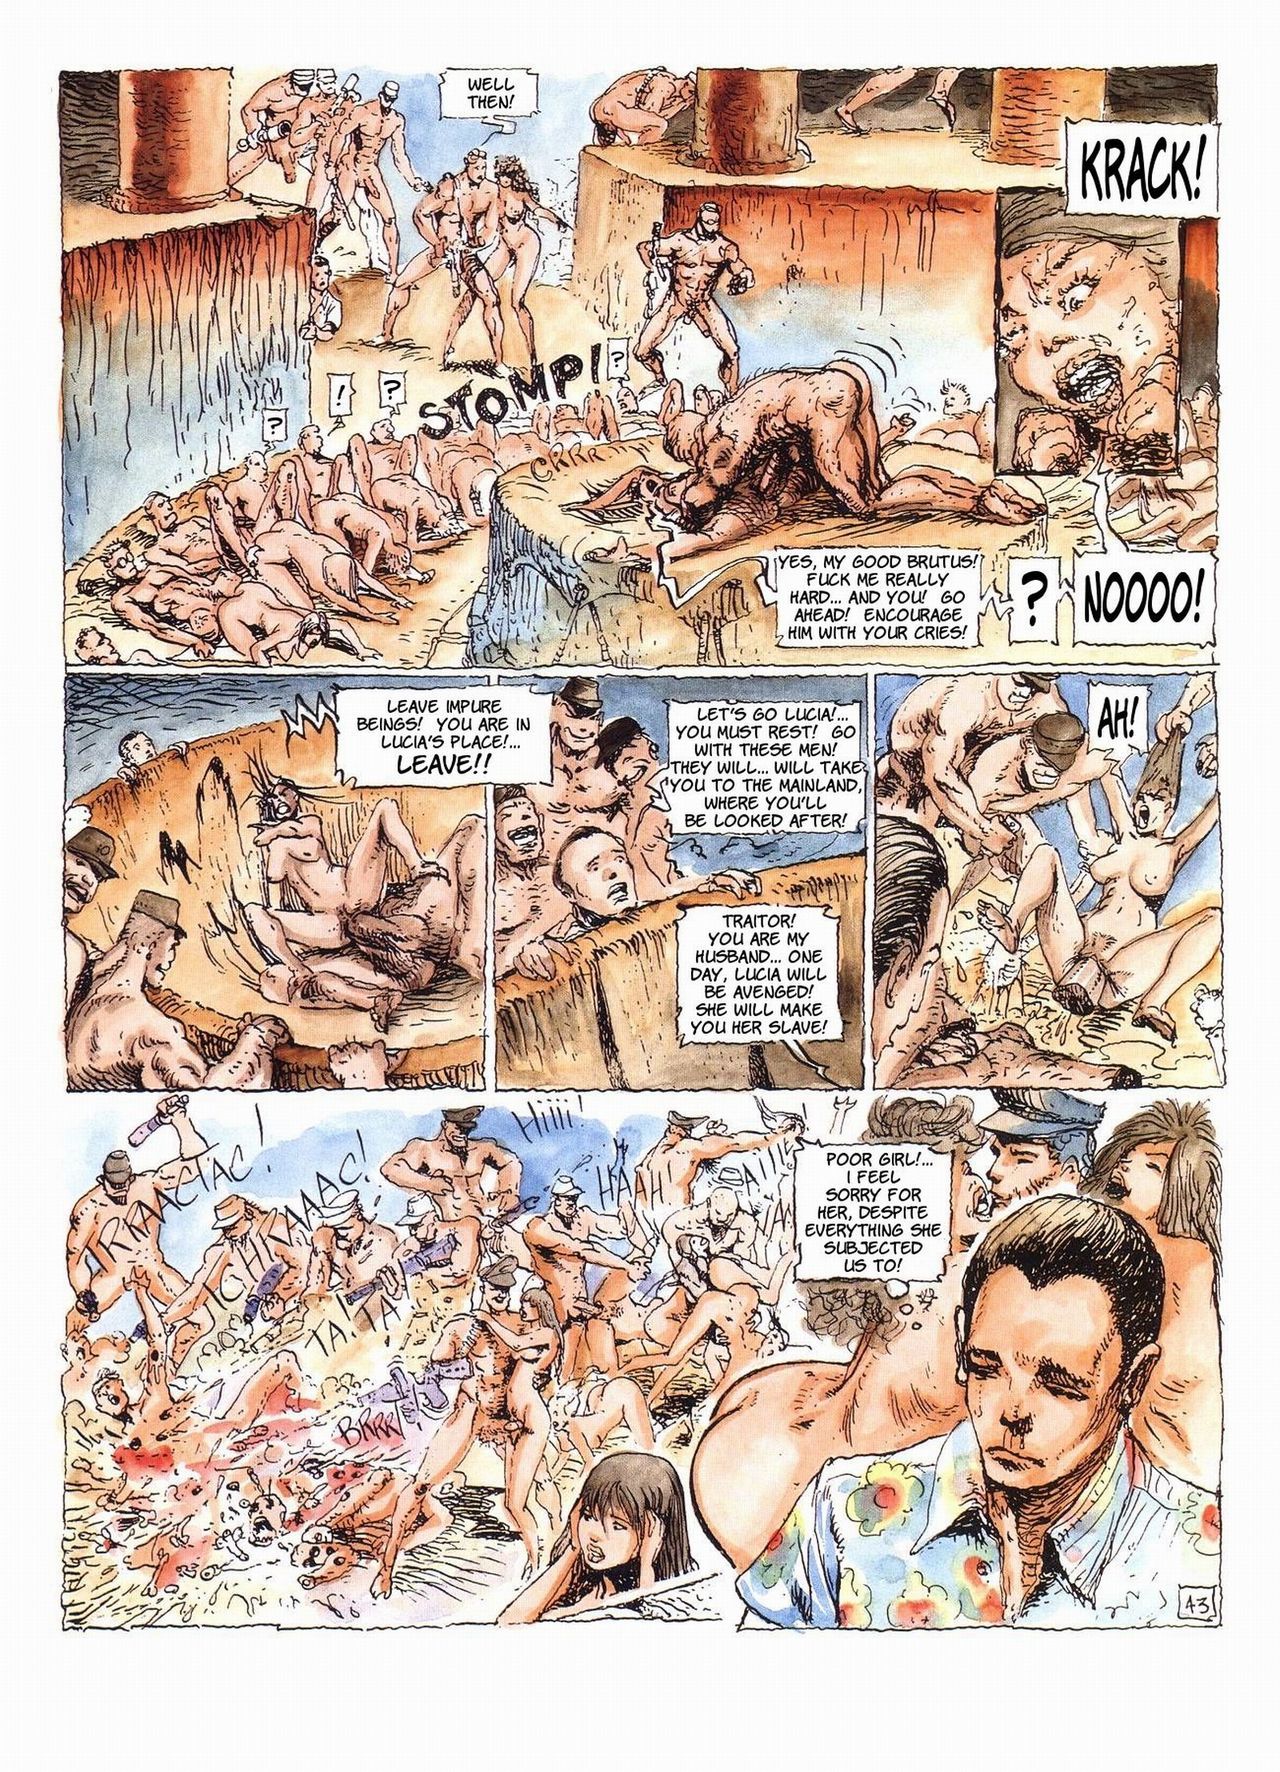 The Island Of Perversions Peter Riverstone page 43